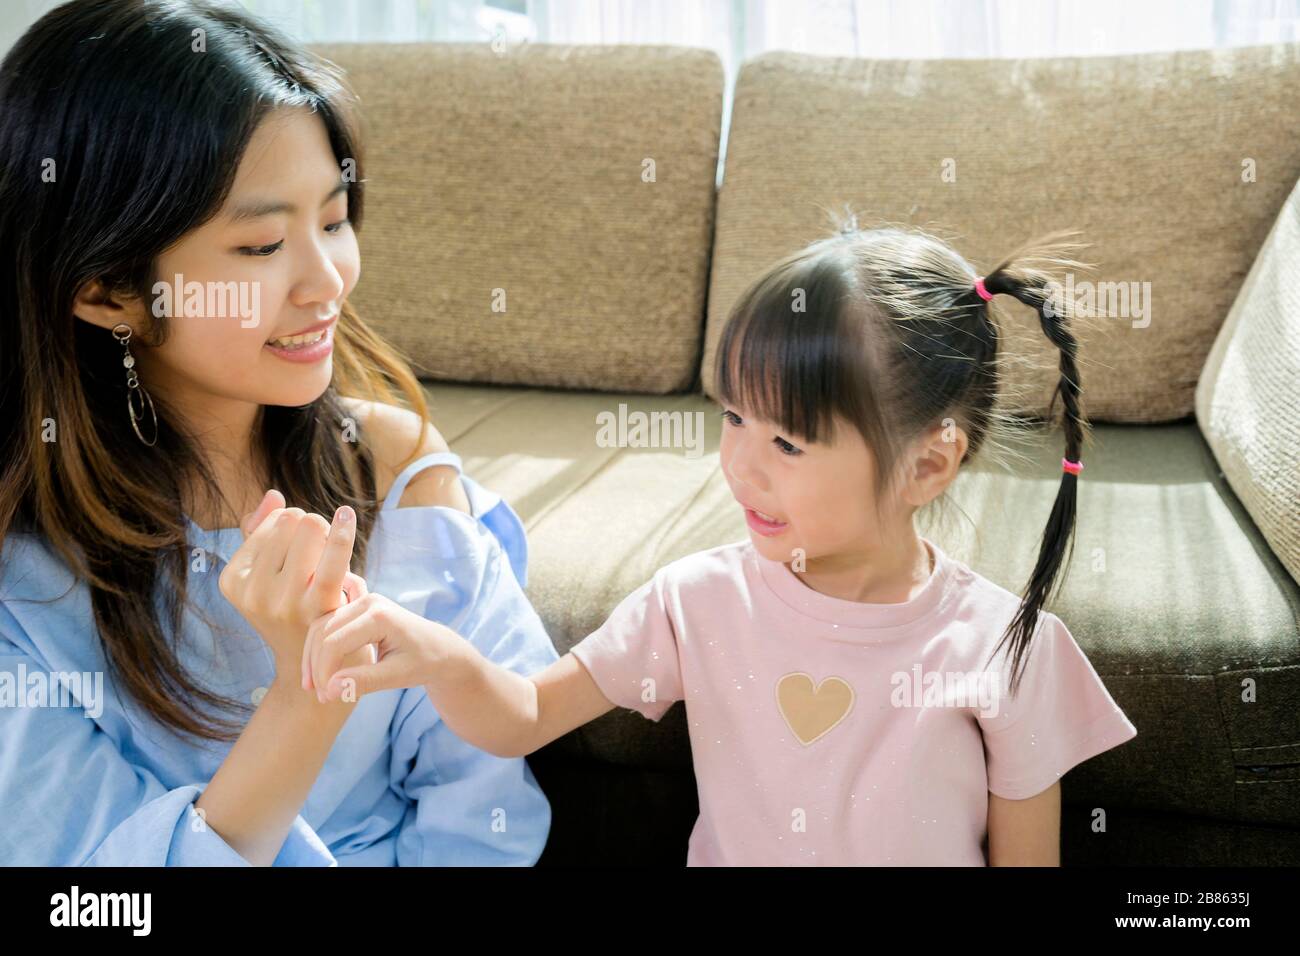 The sisters will reconcile. Using their fingers together, they are in the house and have activities to do together. Stock Photo